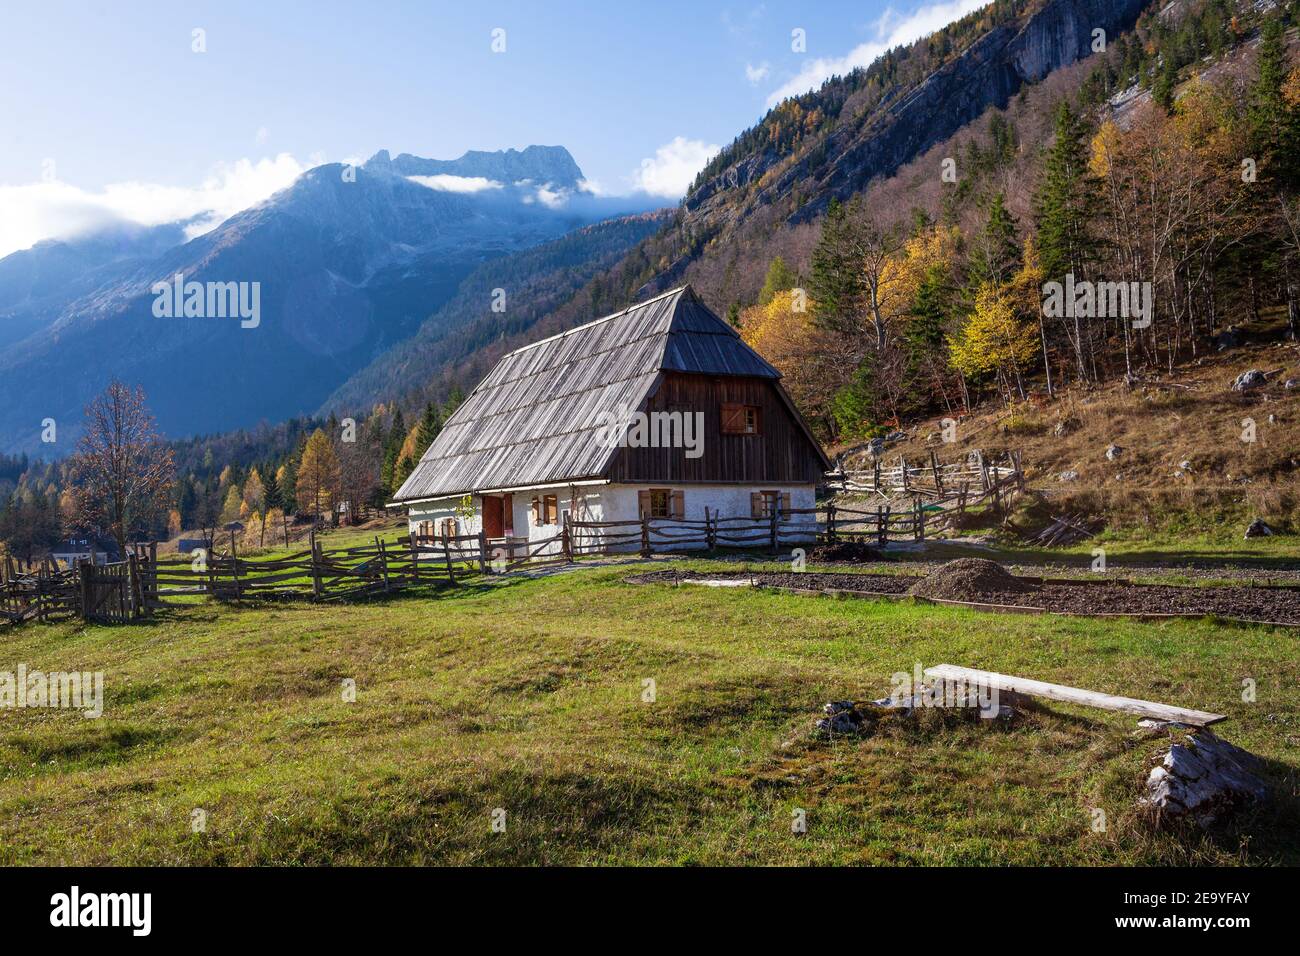 Traditional Trenta house in the July Alps with a wooden roof and an old wooden fence surrounding the house. Stock Photo